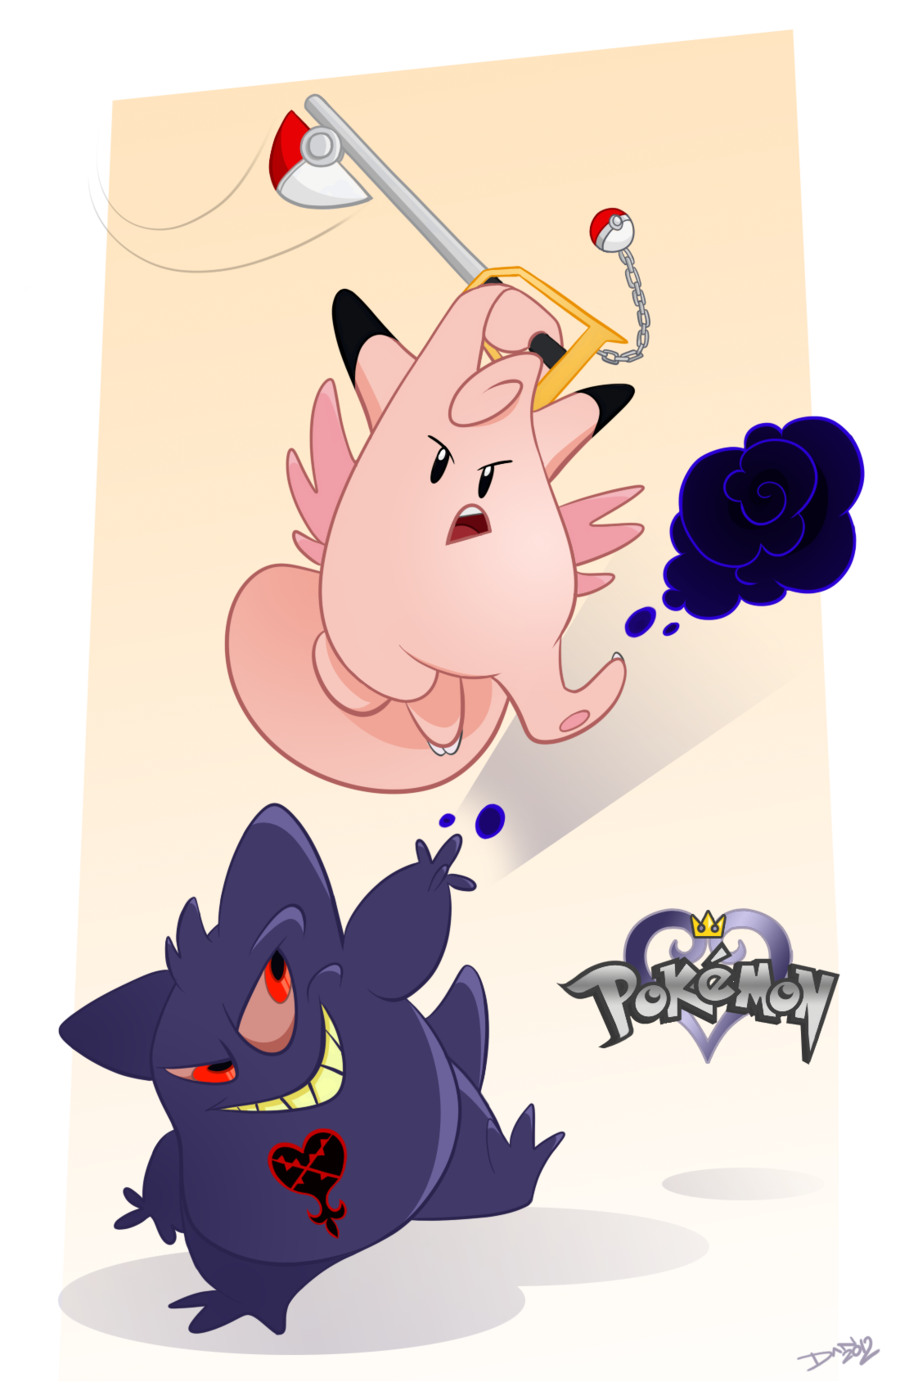 Kingdom Hearts – Clefable and Gengar by PasteCat on DeviantArt